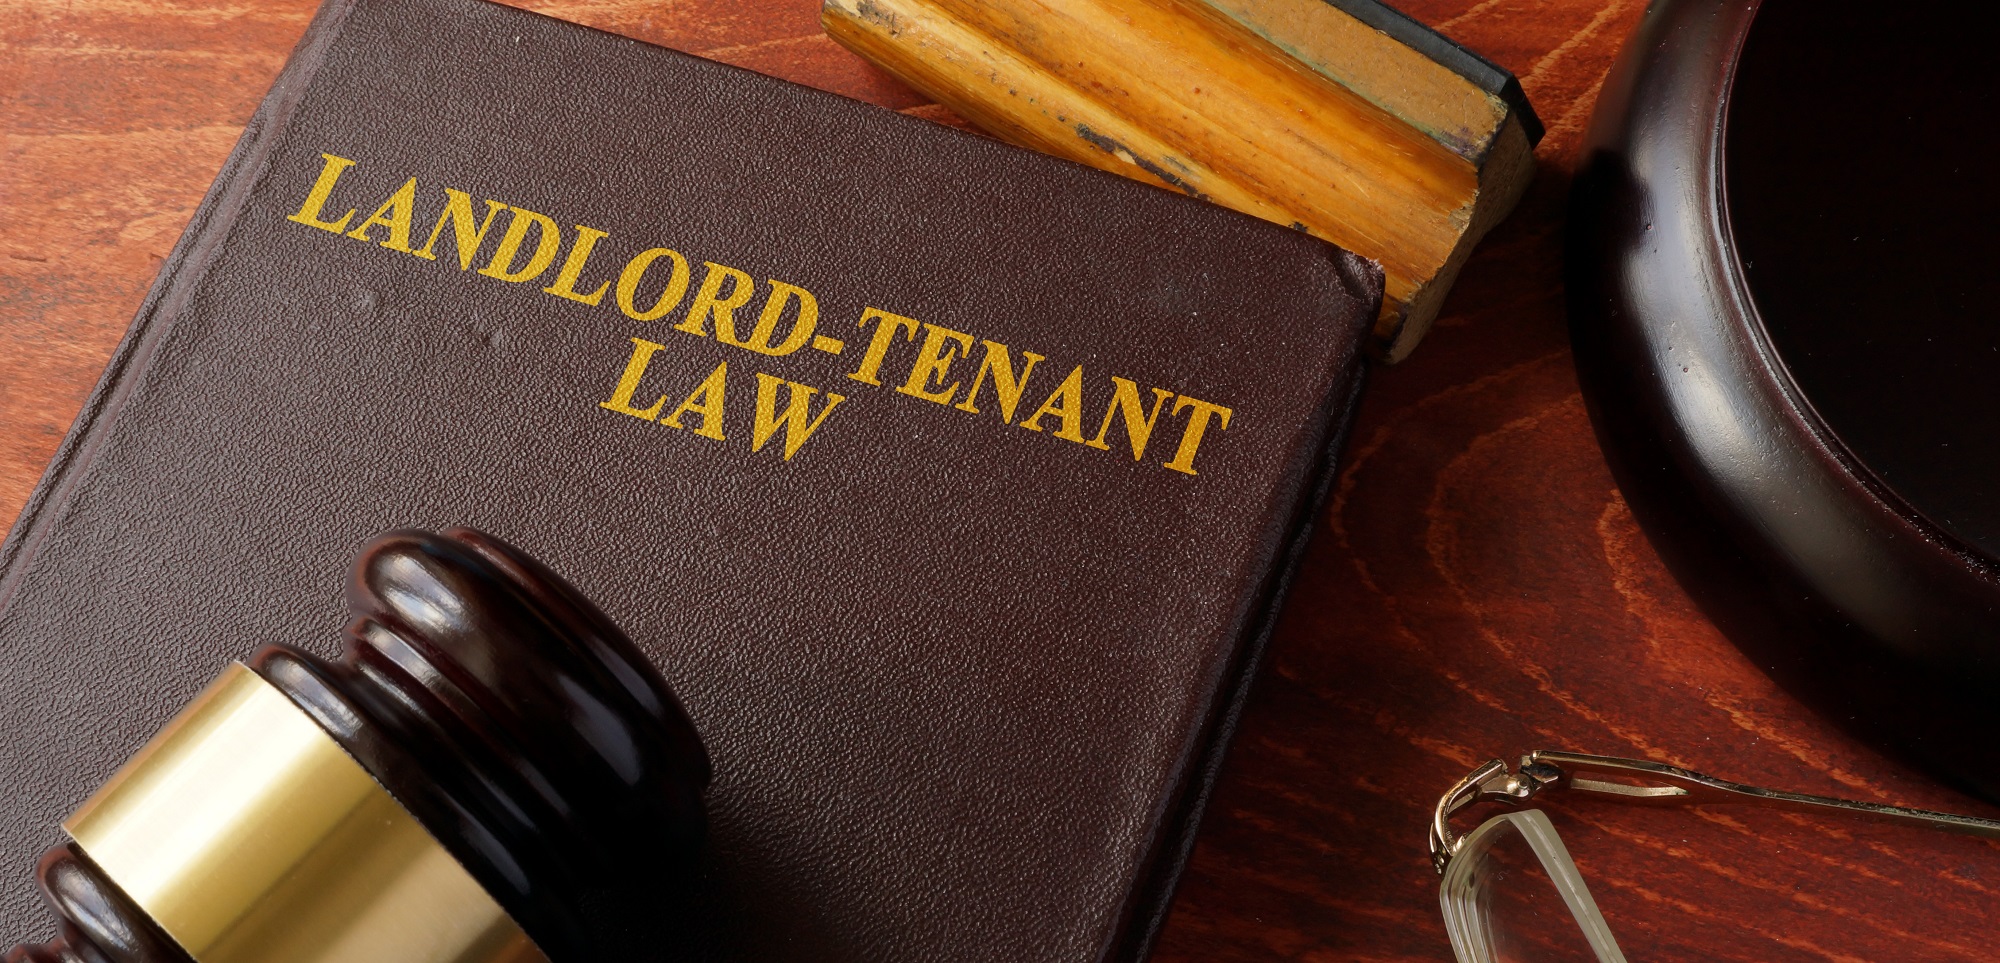 Landlord legislation: Everything you need to know before letting a property